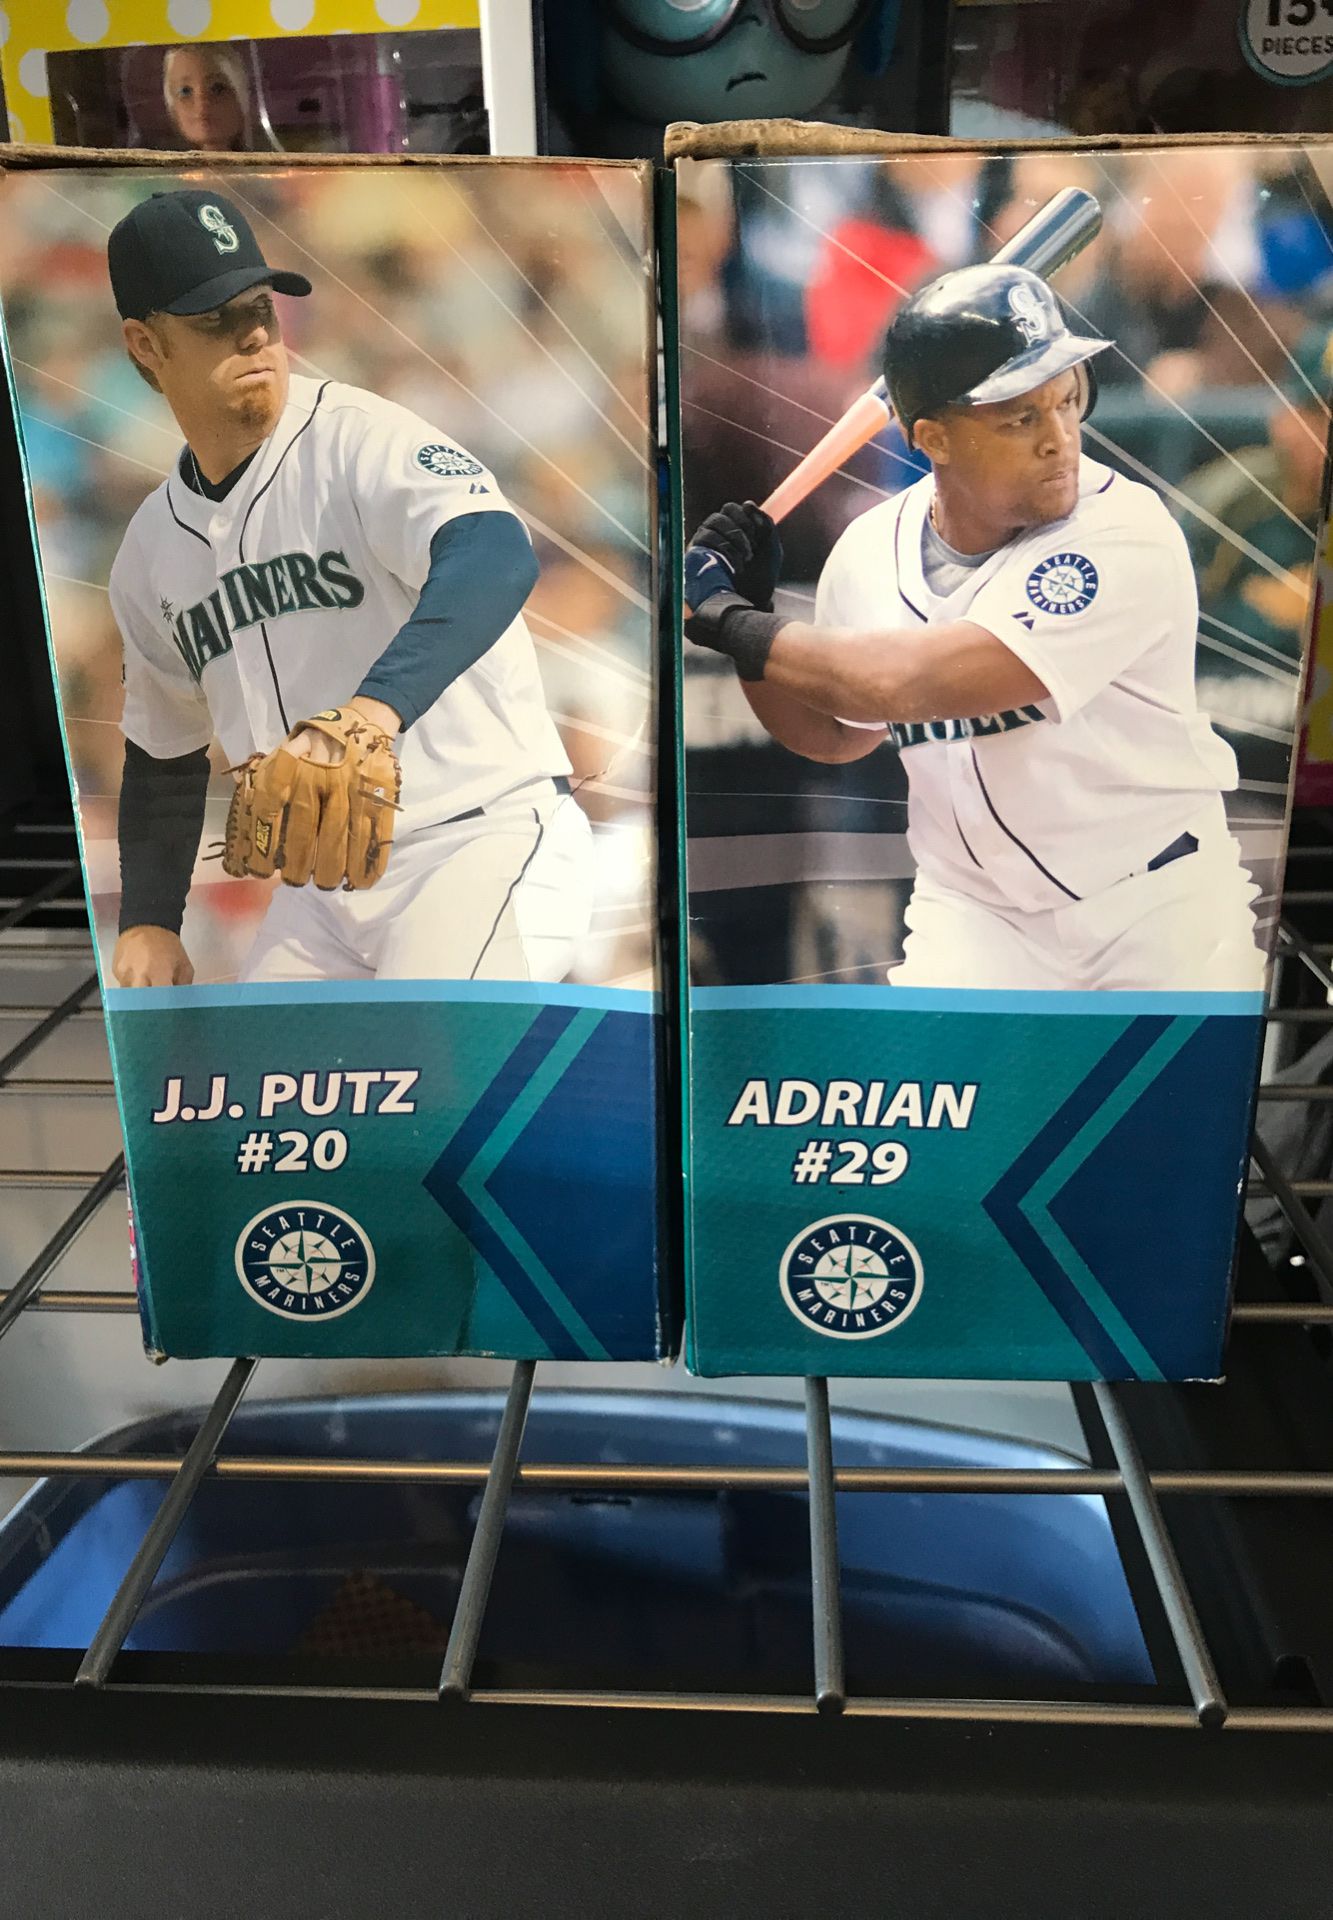 2008 Mariners collection toys set of 2